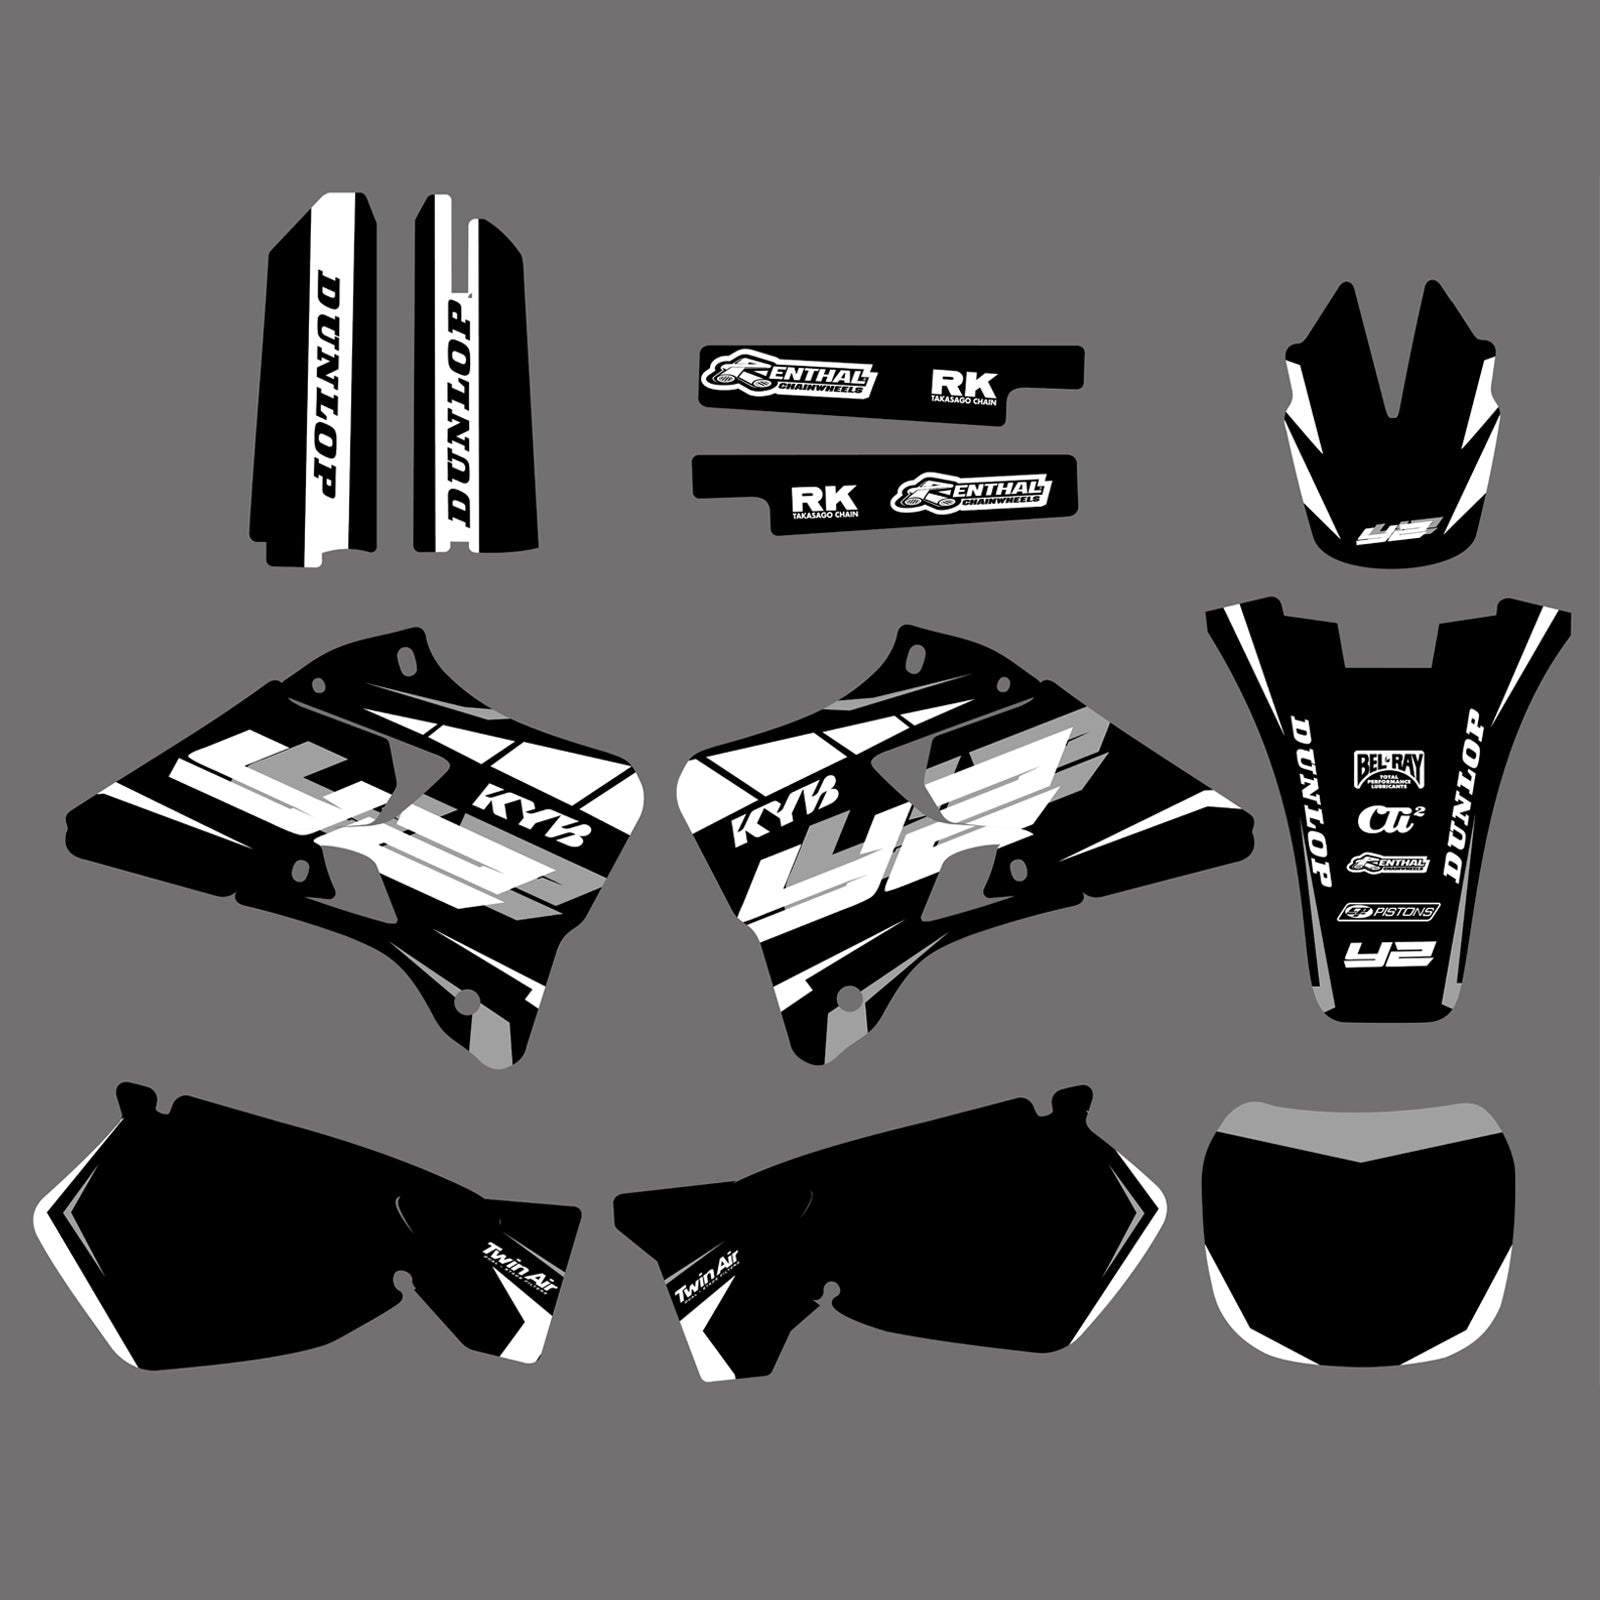 Team Graphics Backgrounds Decals For Yamaha YZ125 YZ250 1996-2001